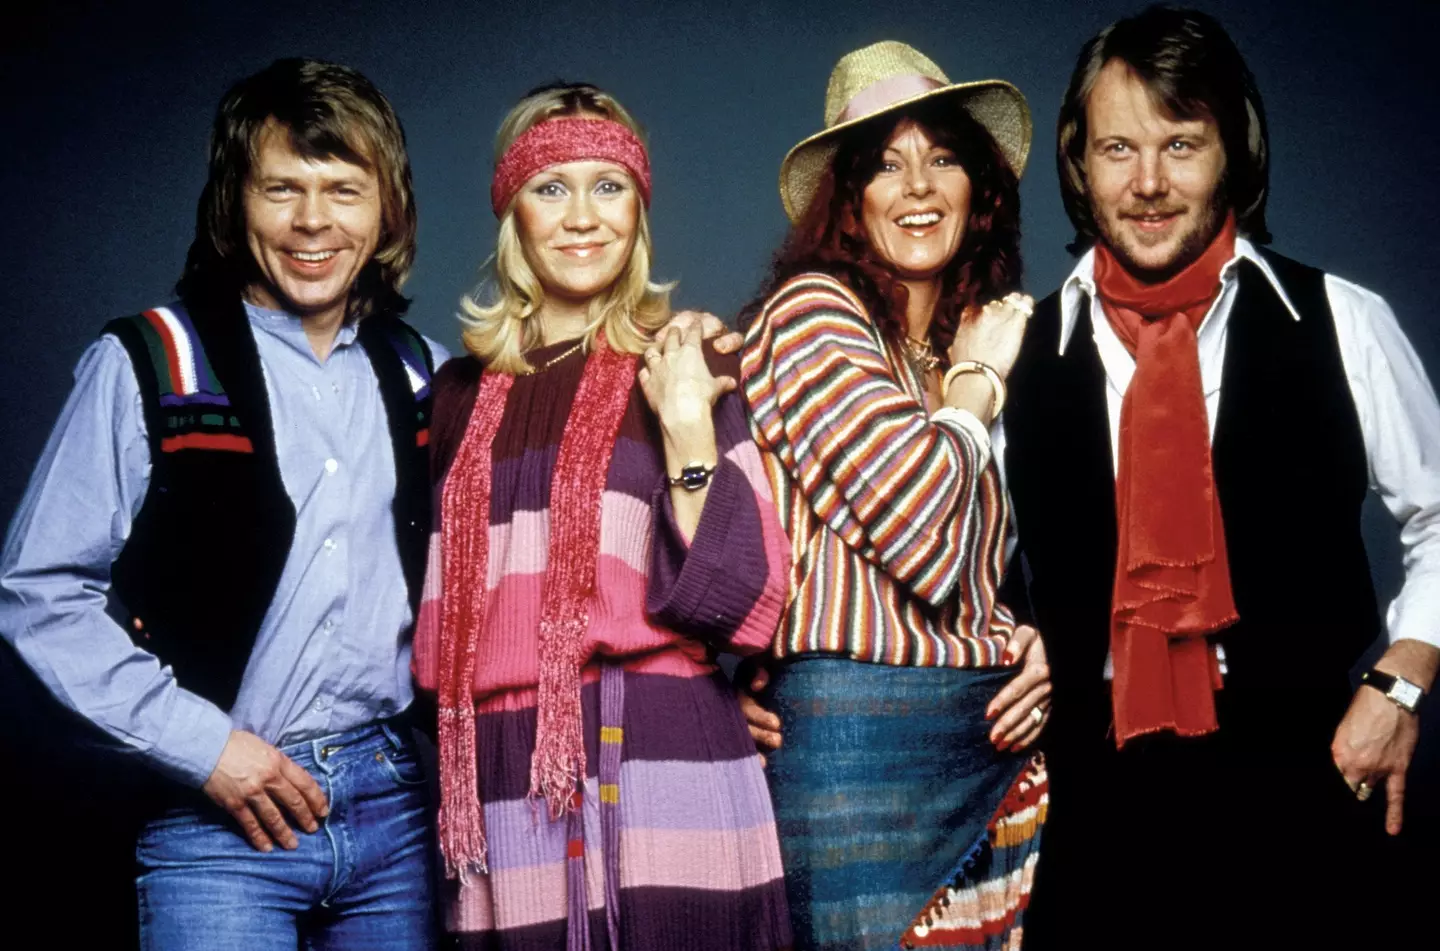 ABBA's last in person performance was a one off show in 2016.